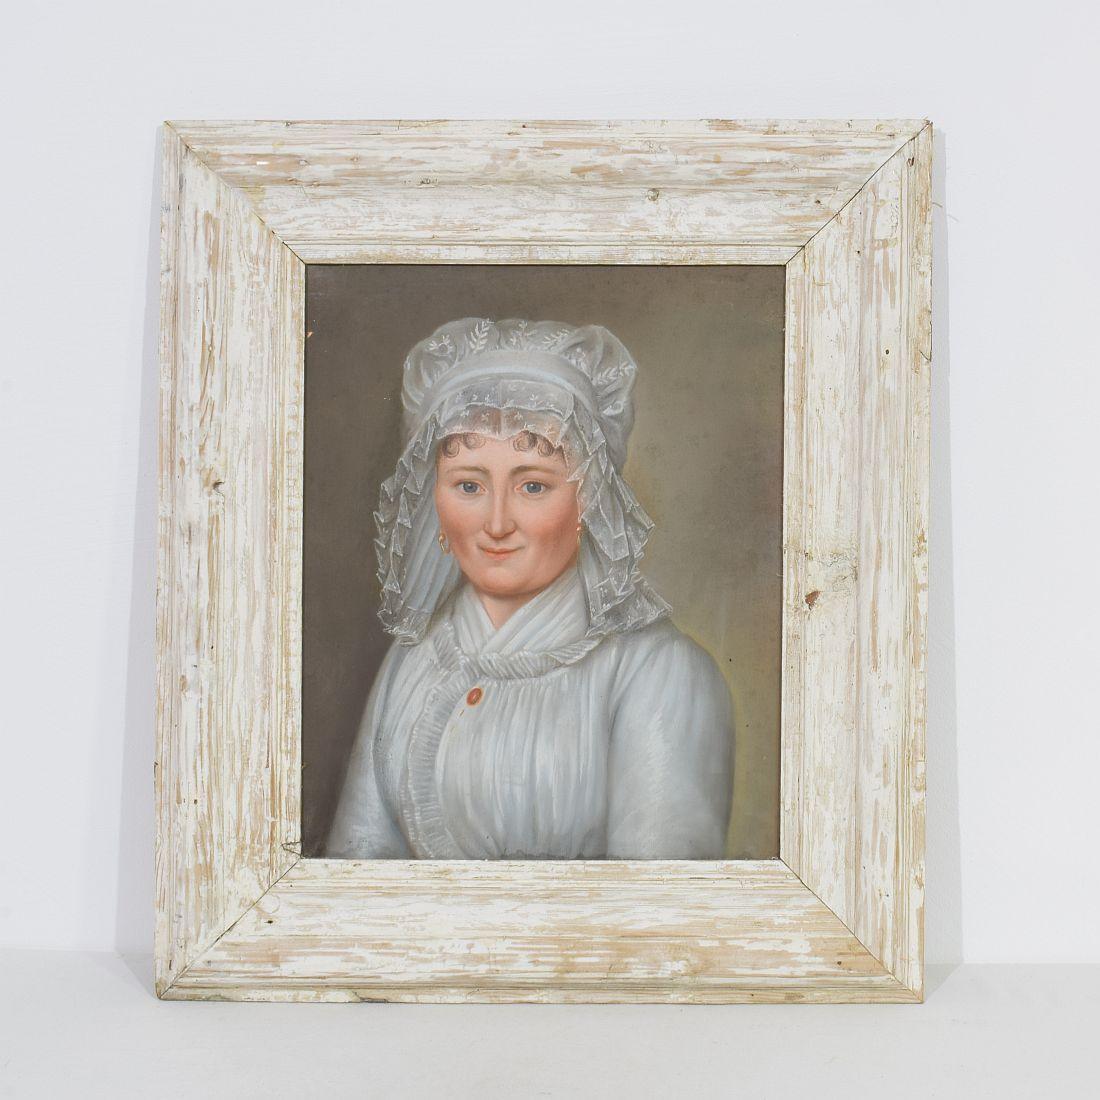 Nice pastel portrait representing a young woman. Wonderful weathered wooden frame and its old glass,
France, 18th century. Weathered, small losses.